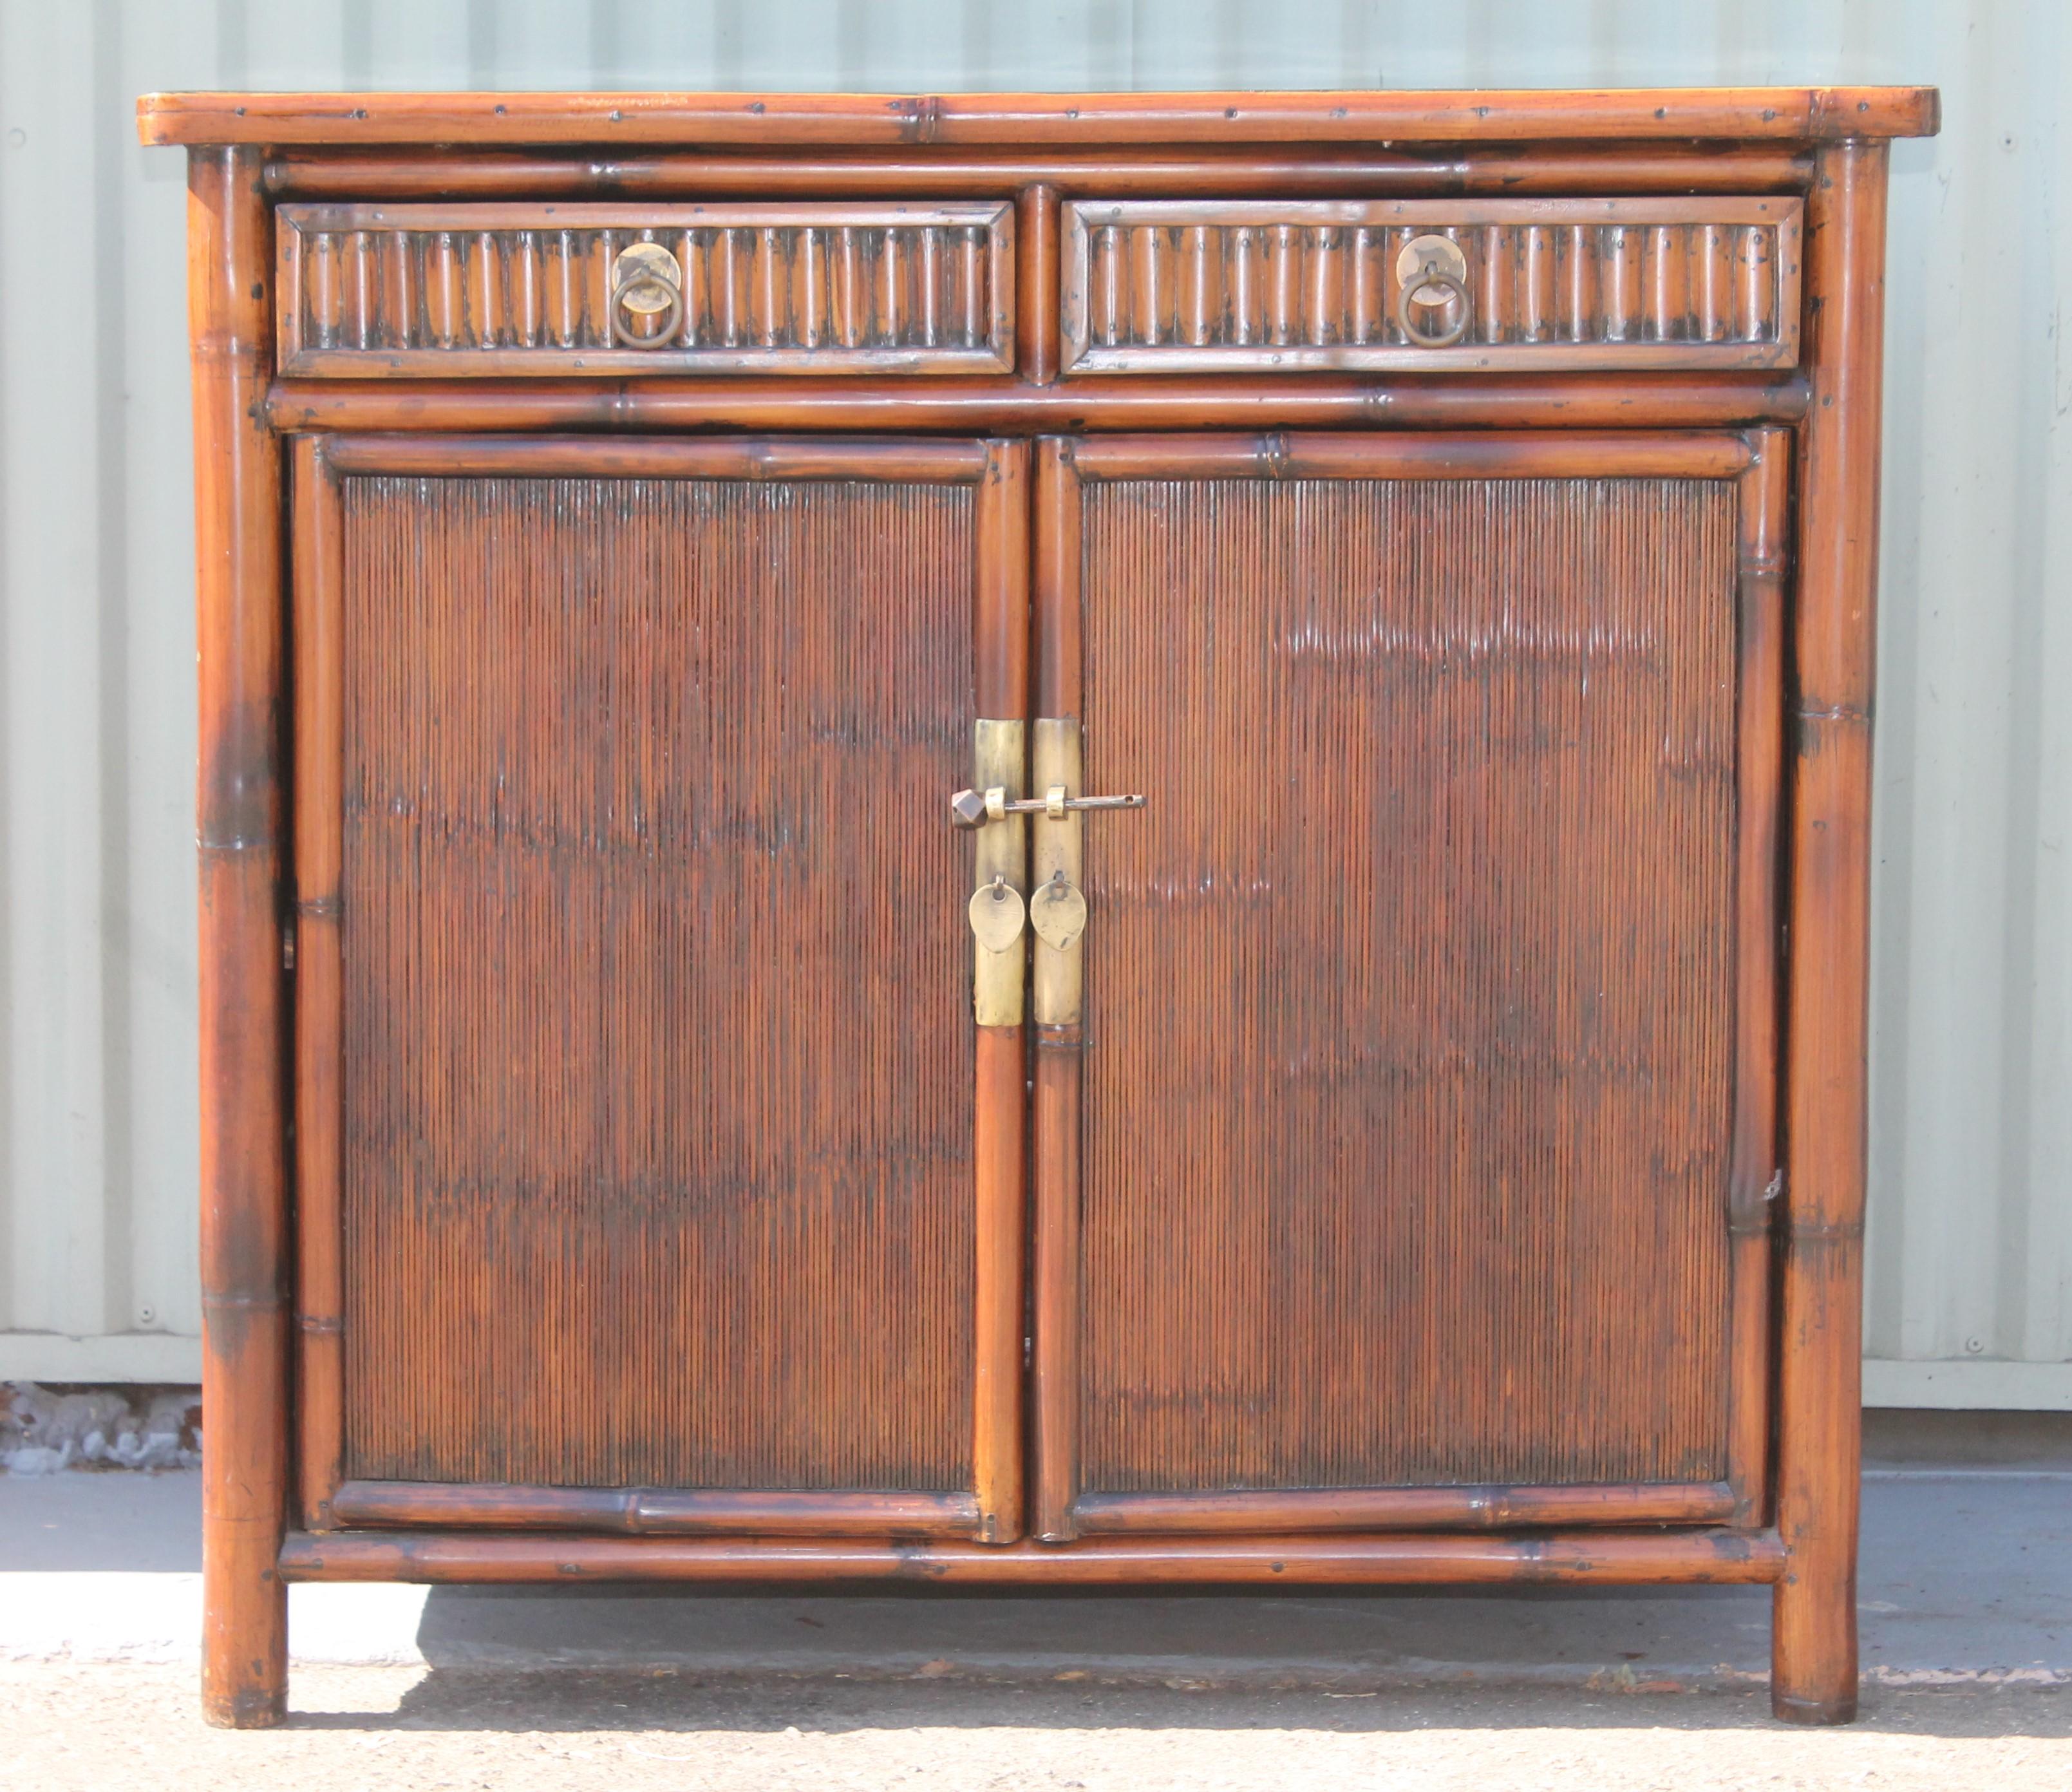 Fantastic 20th century Chinese bamboo bedside cabinets / great end tables as well. The condition is very good with black enameled tops of cabinets. The condition is very good with all original brass hardware.